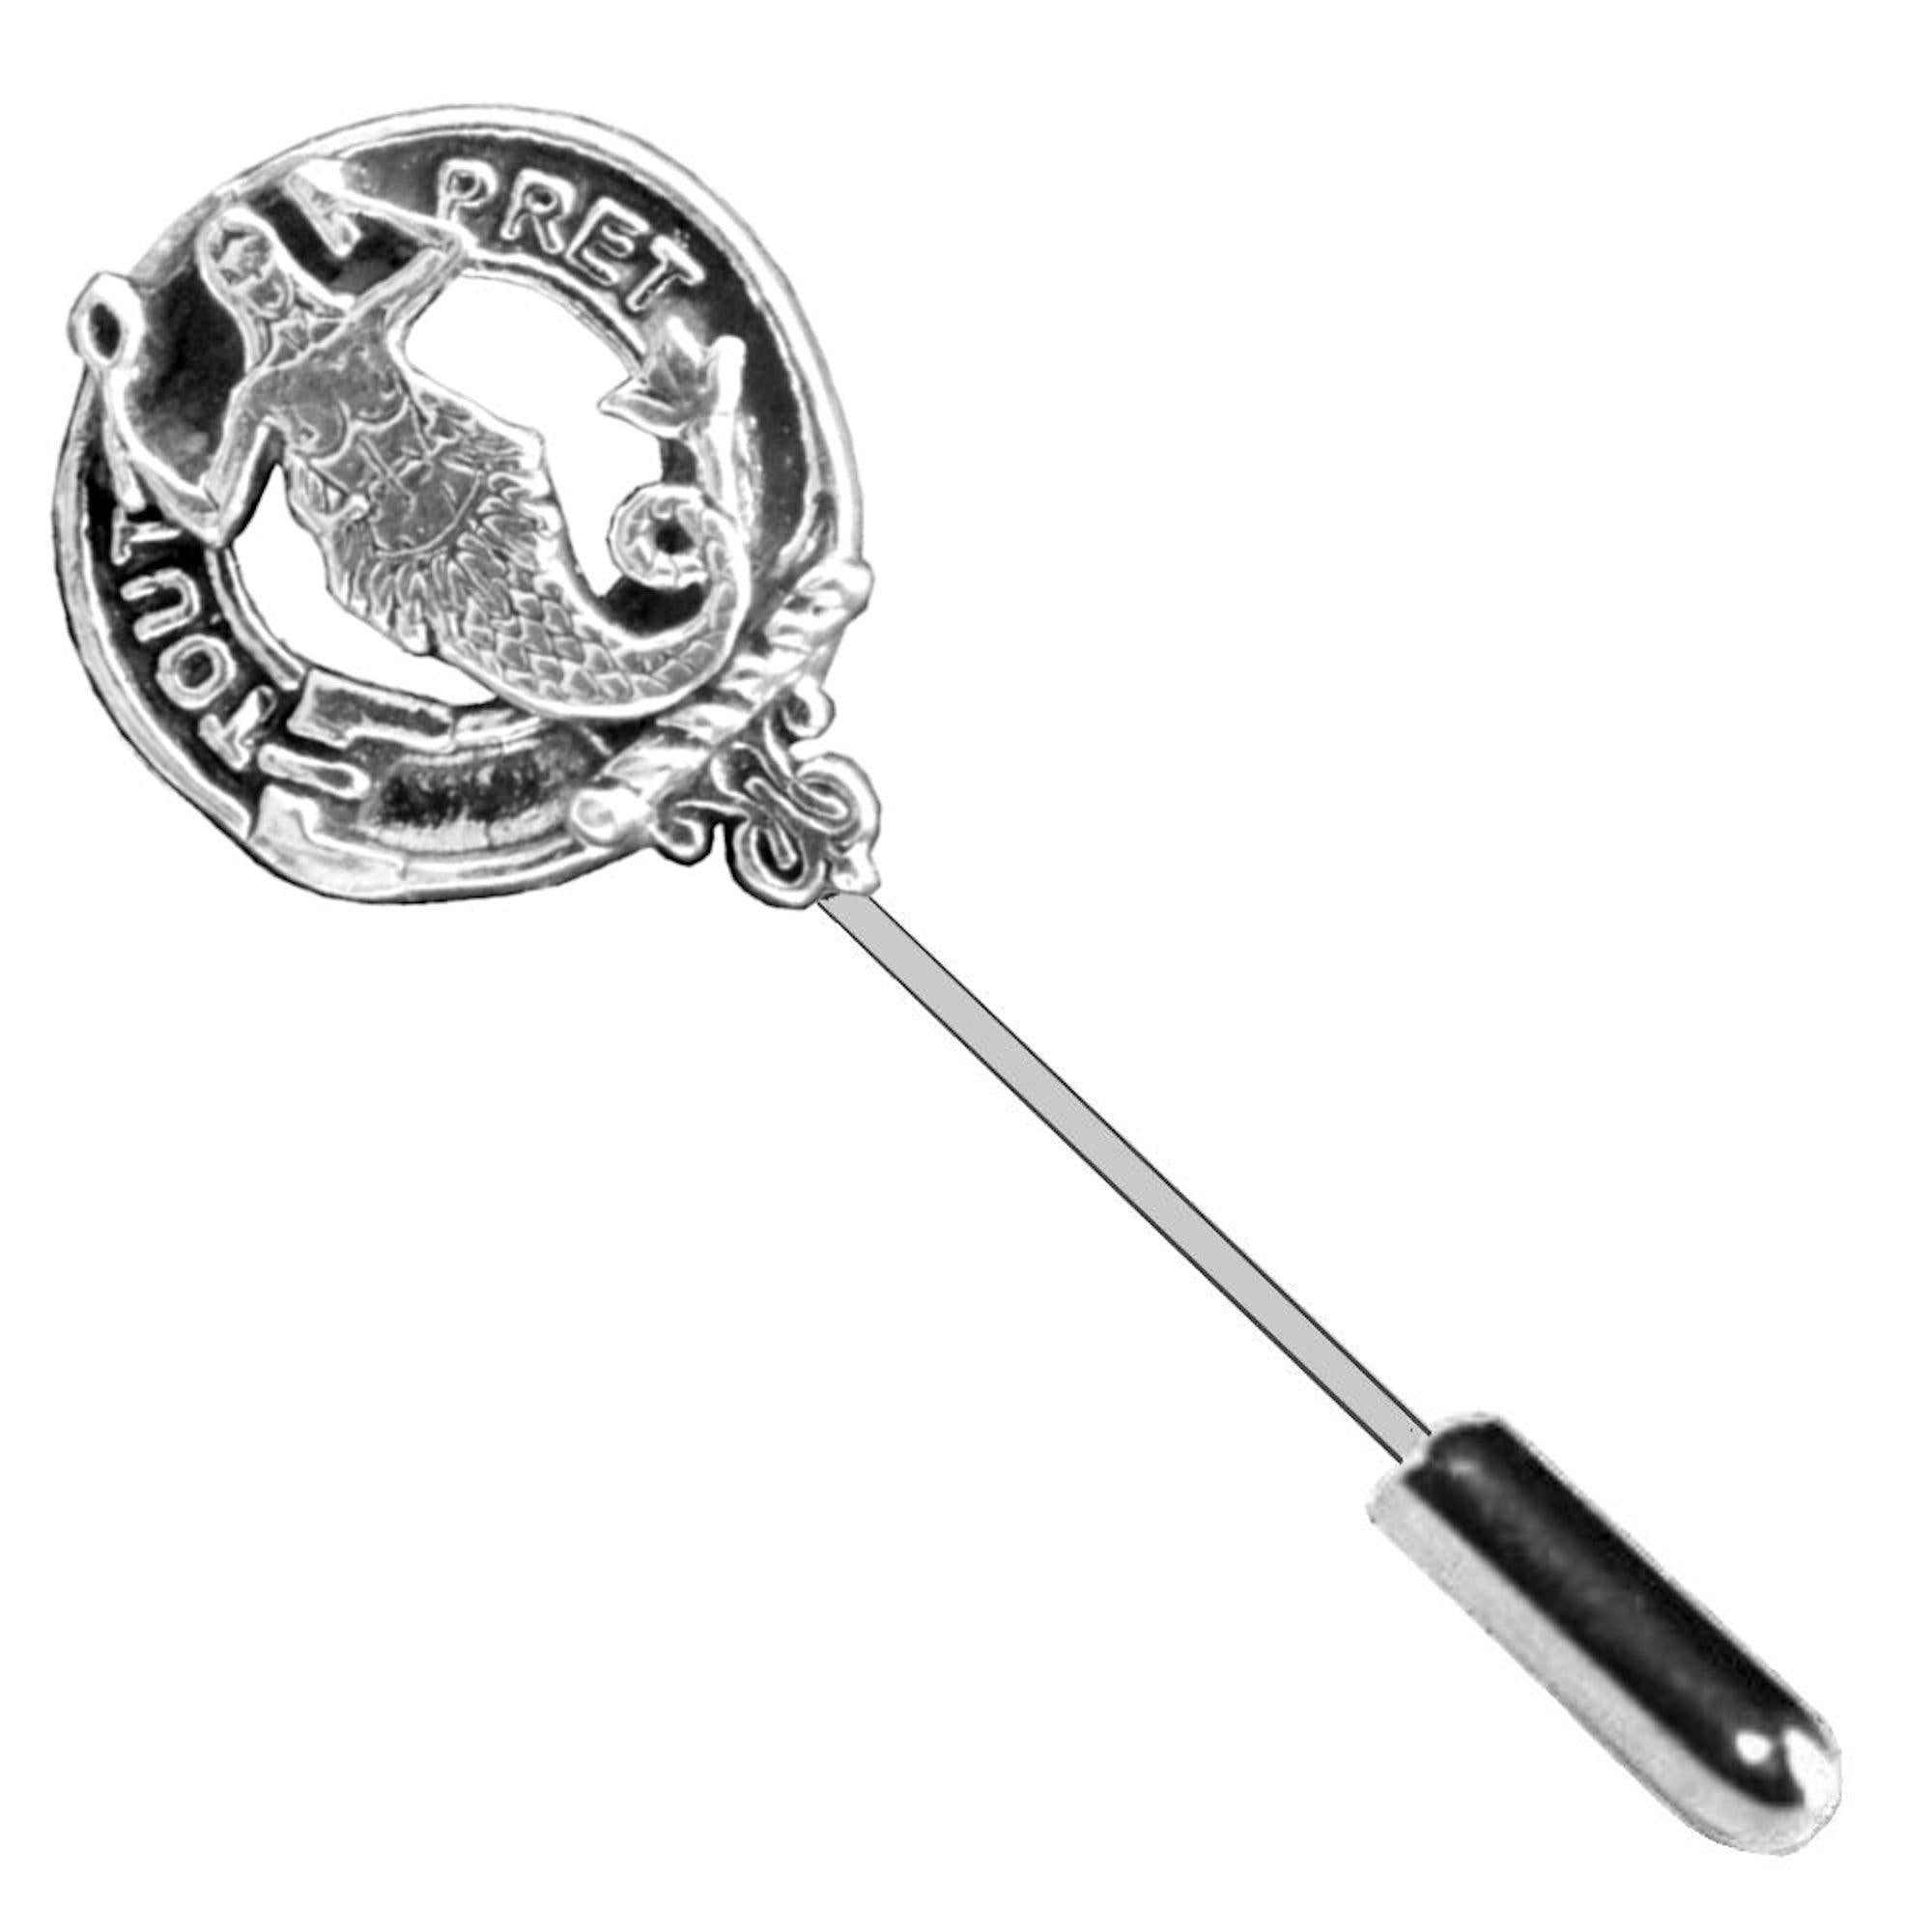 Murray Clan Crest Stick or Cravat pin, Sterling Silver